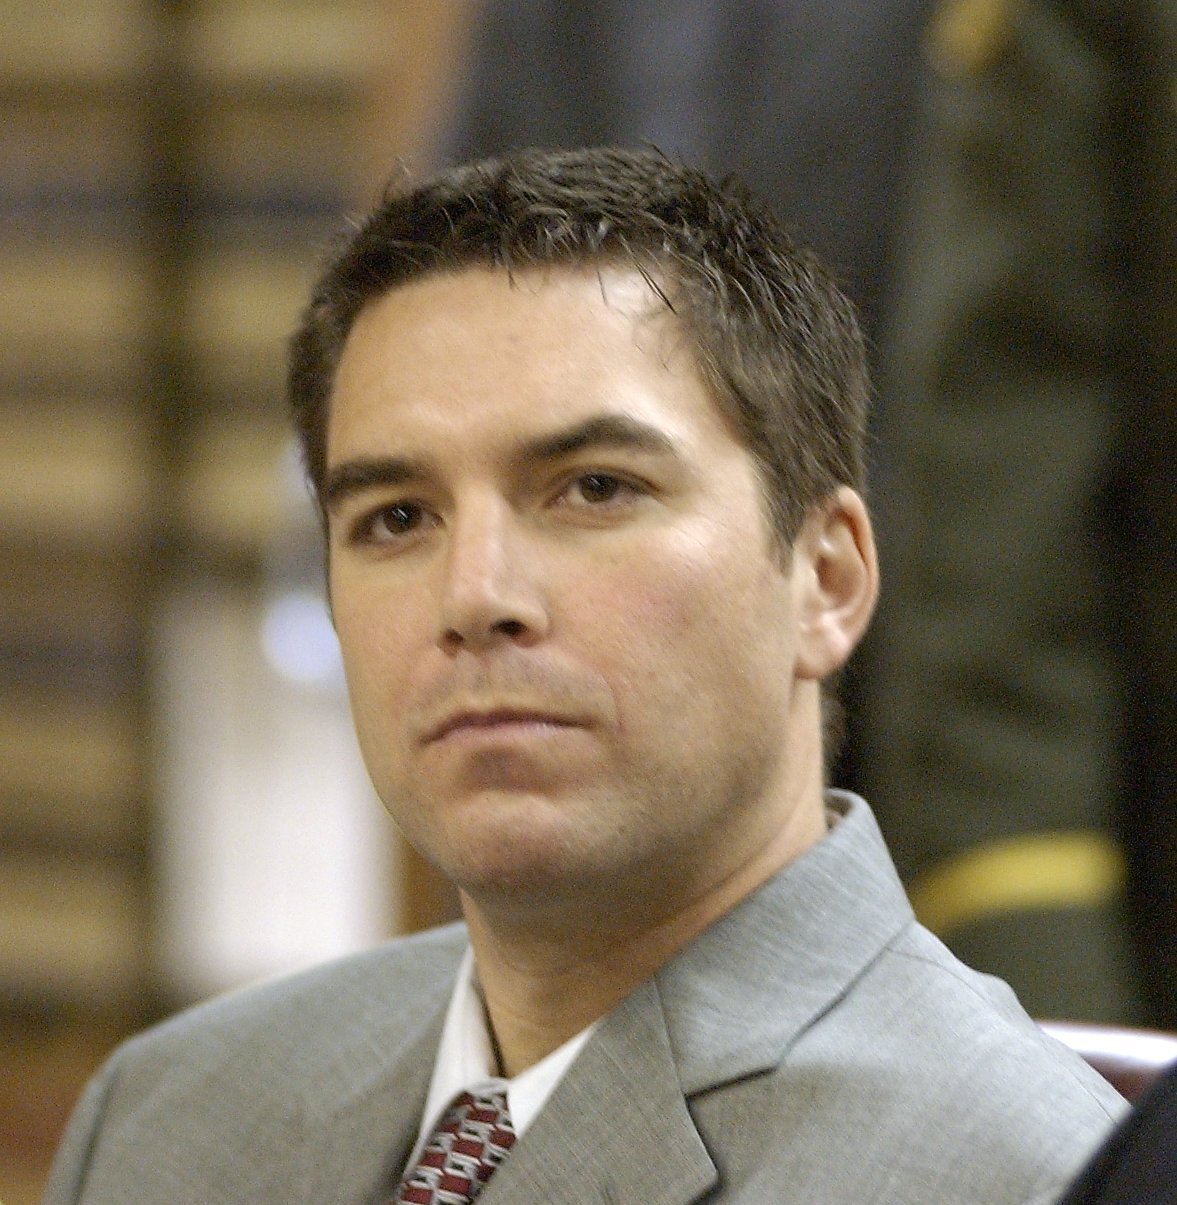 Where is Scott Peterson now?